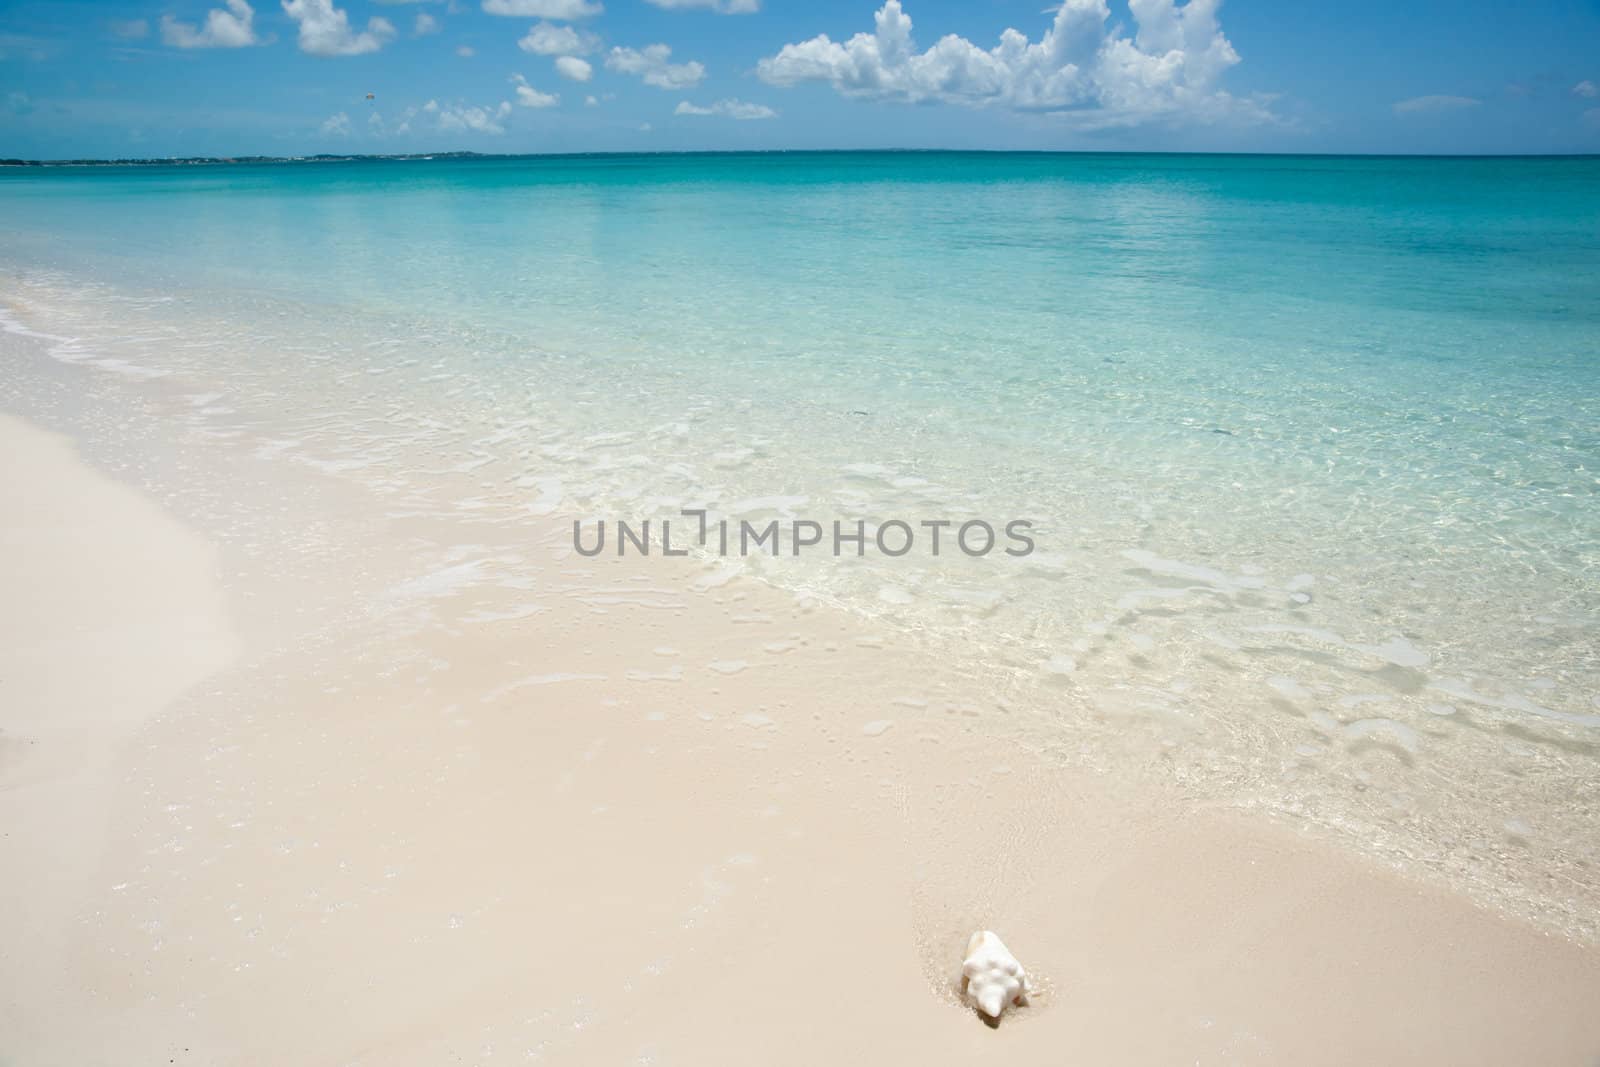 Sea view from beach, with conch shell in foreground.